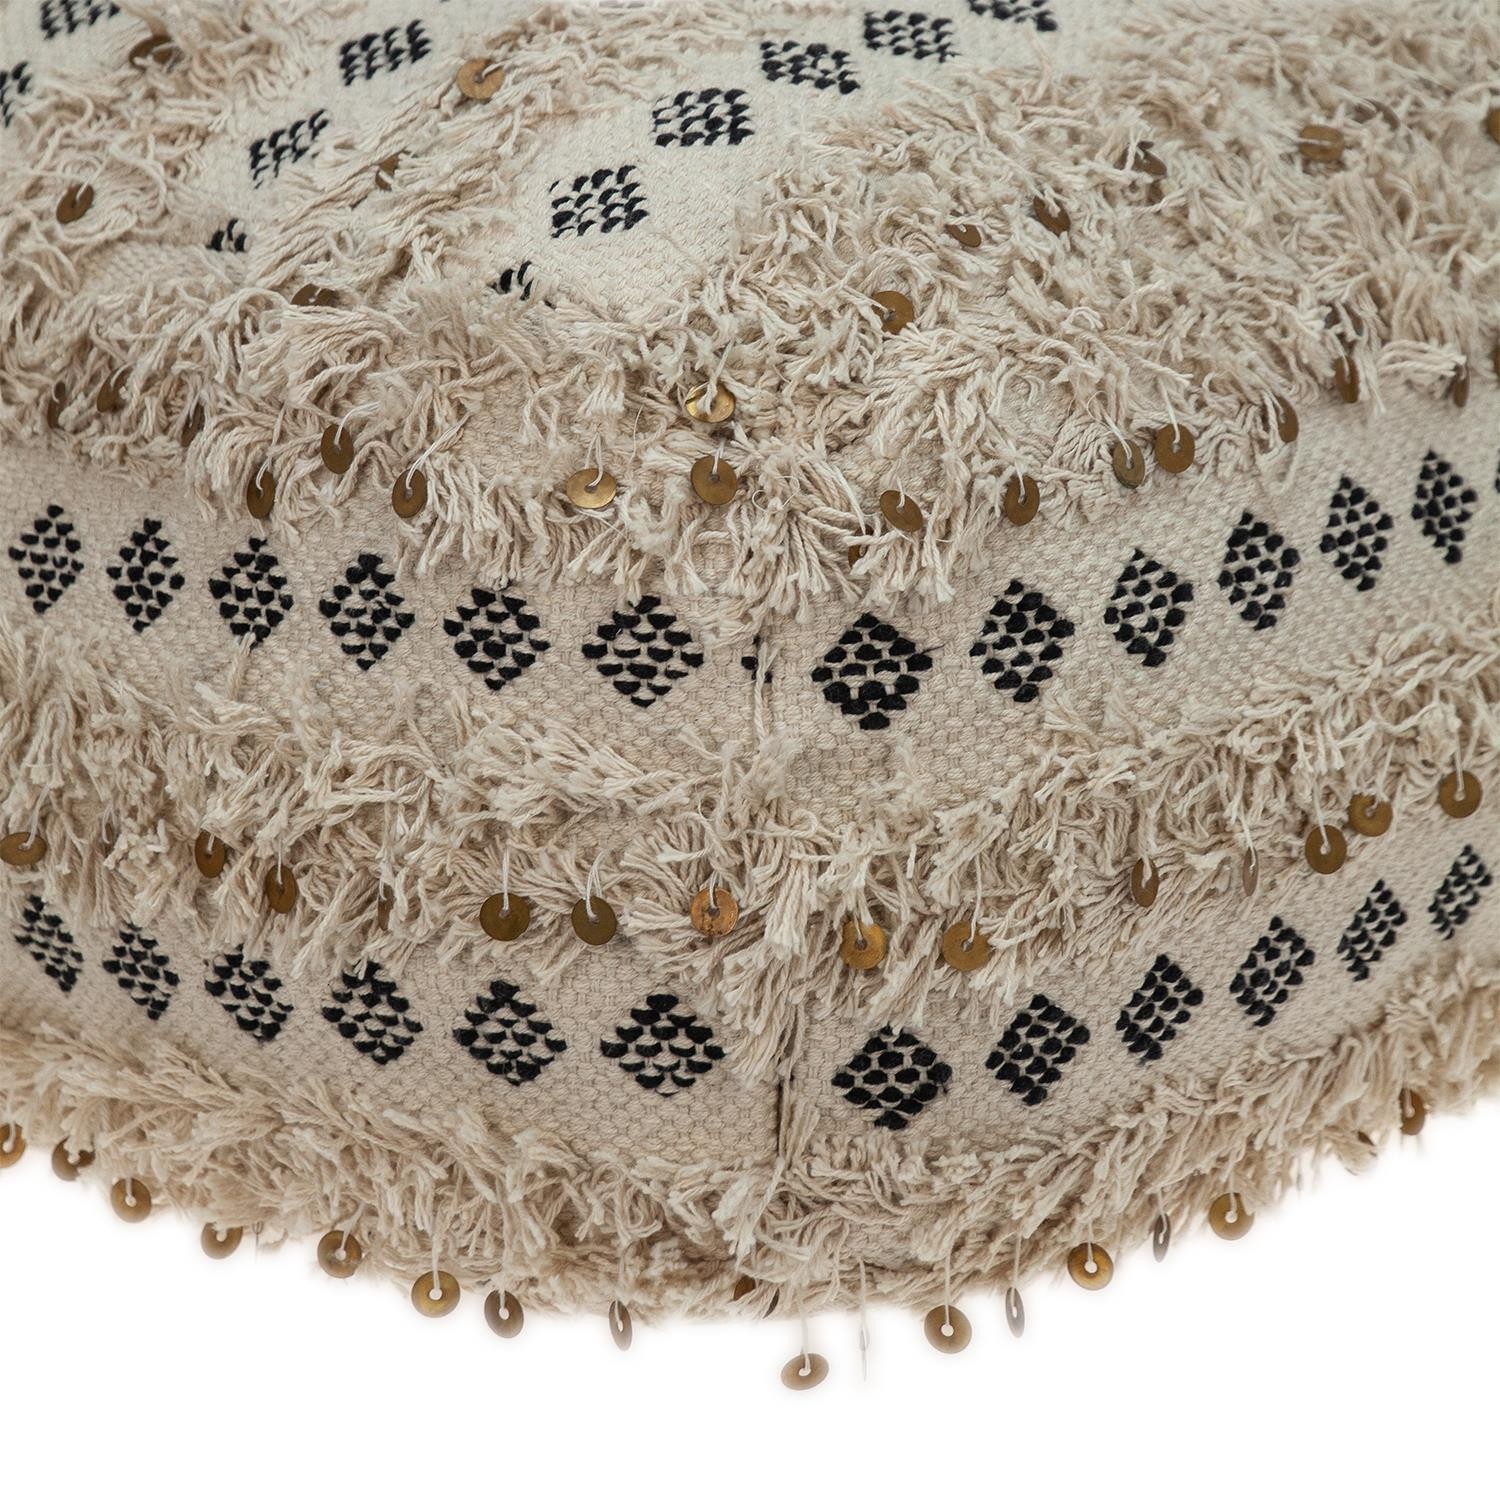 Boho Fringed Beige and Black Handwoven Pouff Ottoman